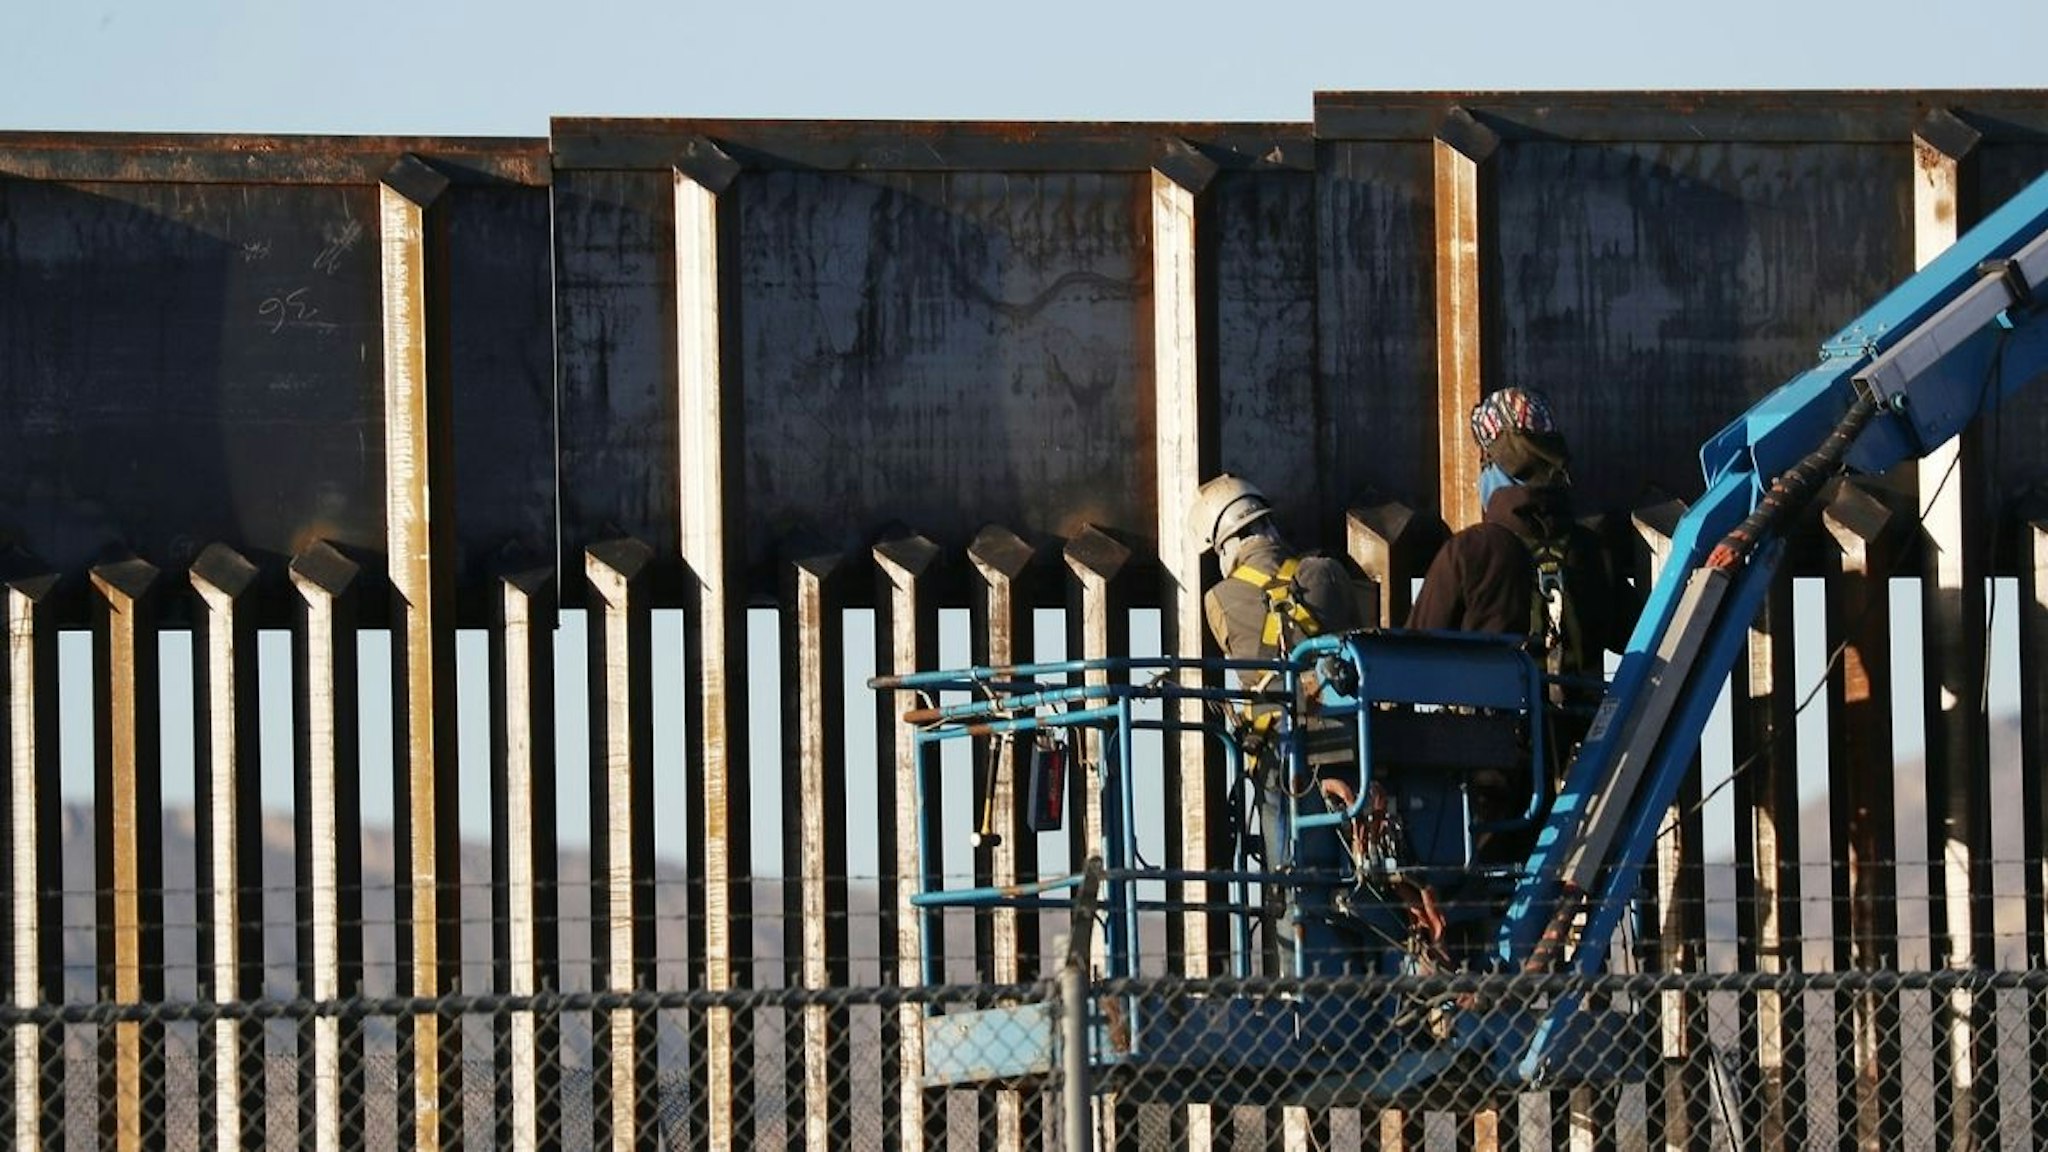 People work on the U.S./ Mexican border wall on February 12, 2019 in El Paso, Texas. U.S.